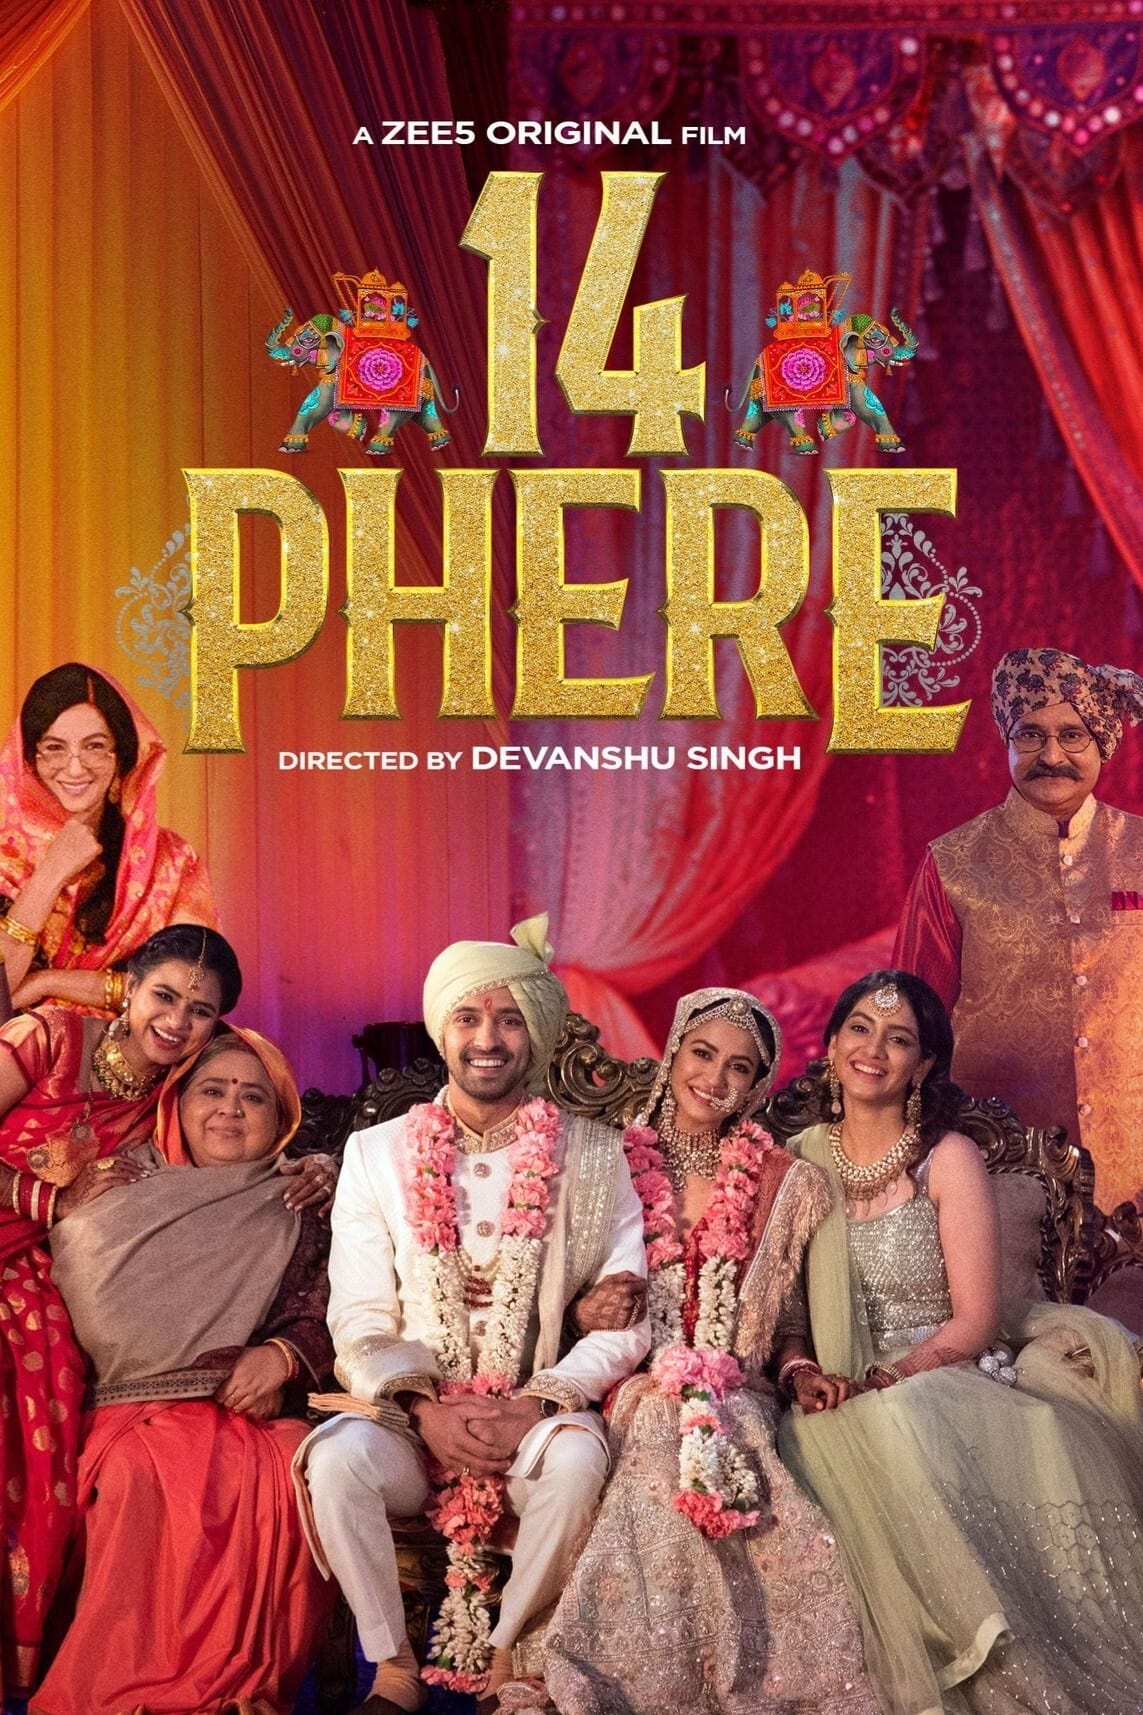 Poster for the movie "14 Phere"